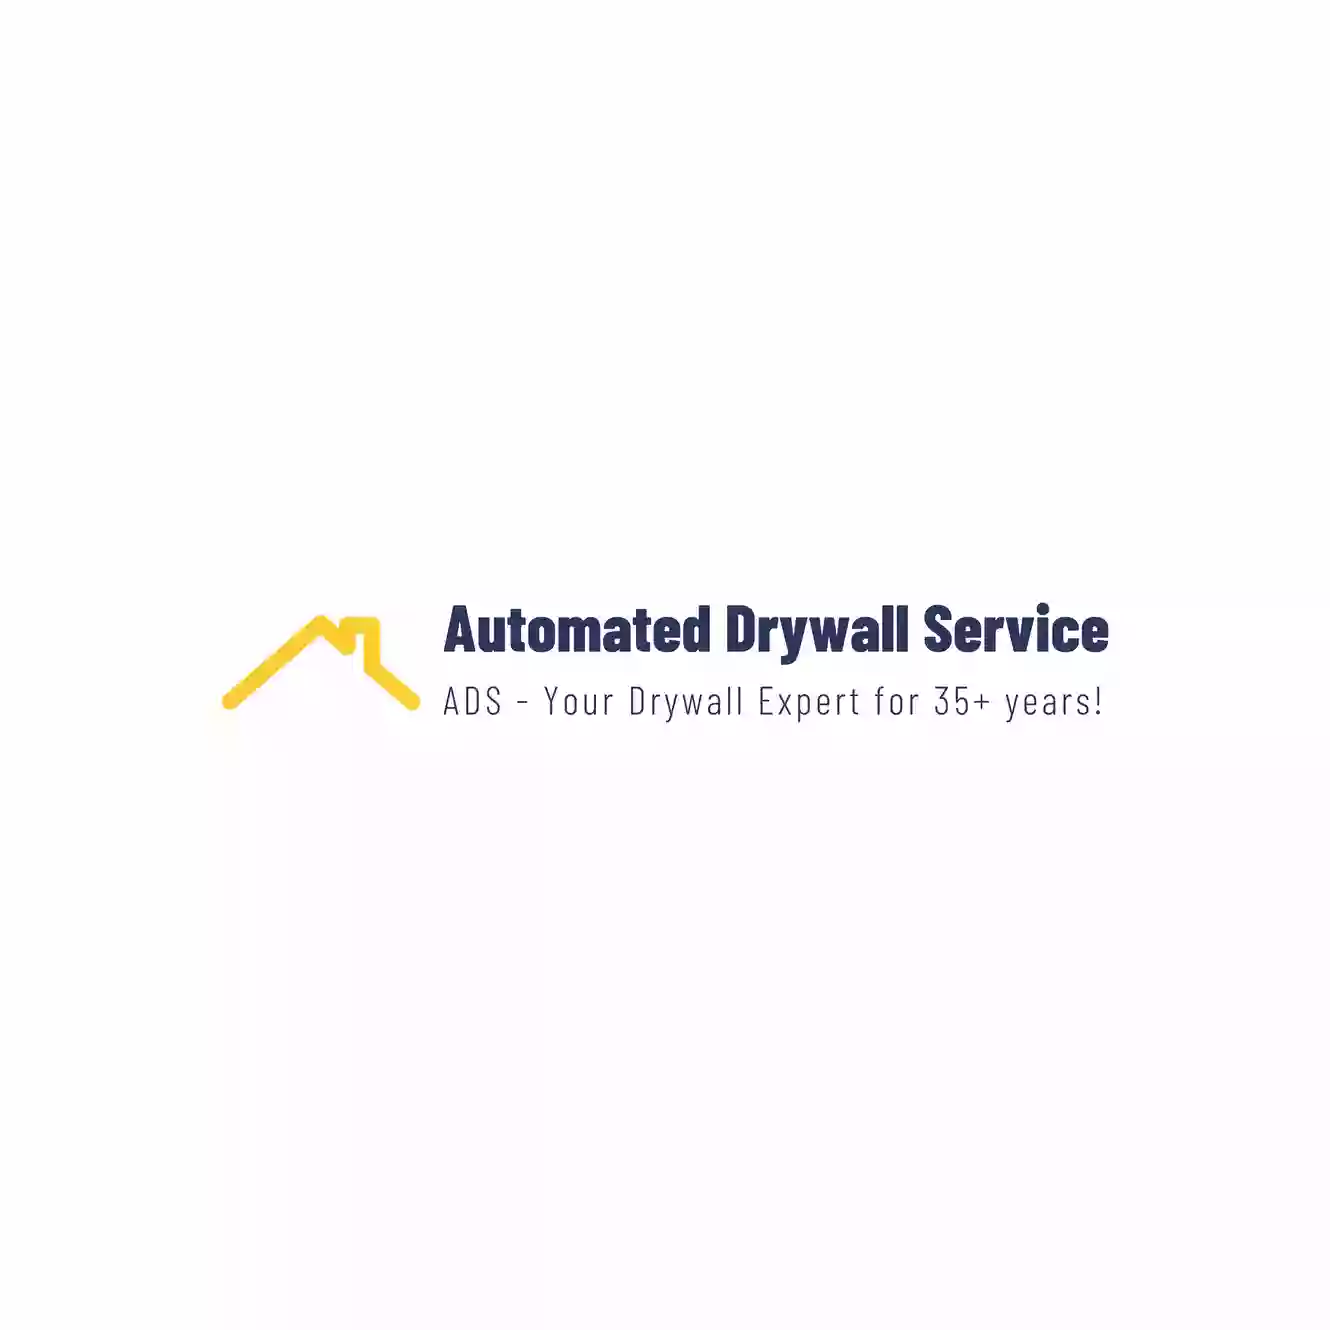 Automated Drywall Service (ADS Drywall)